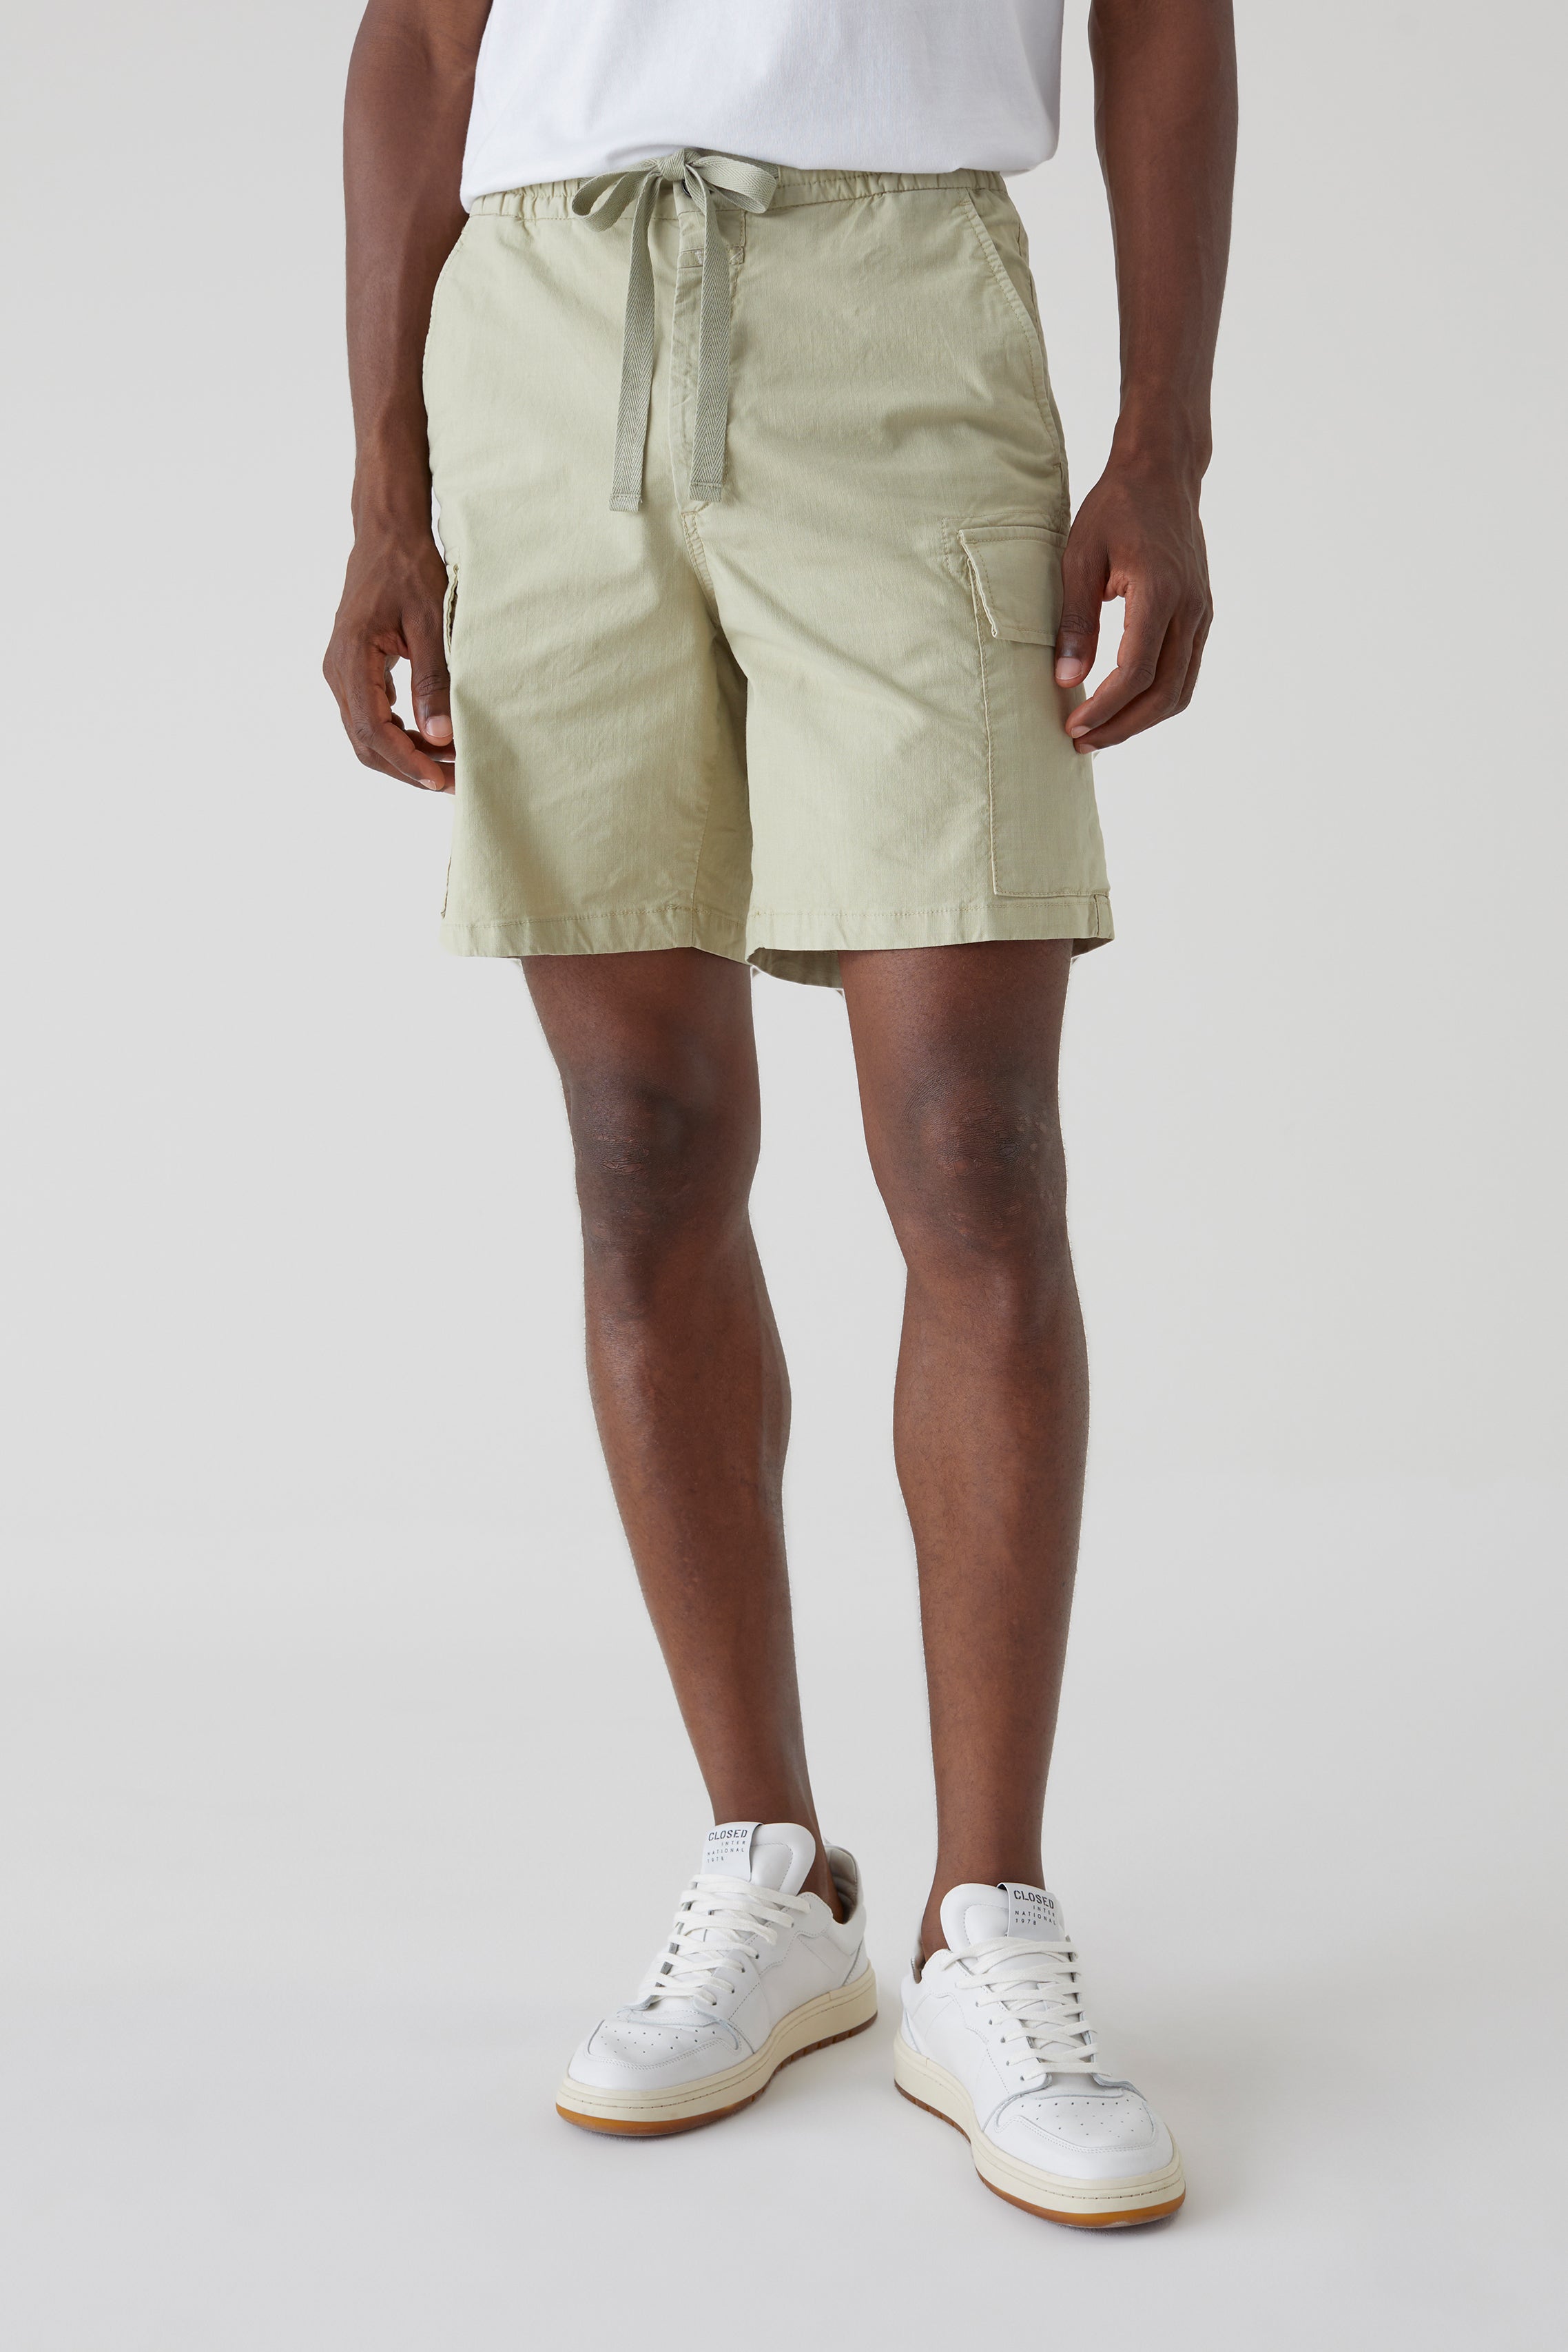 CLOSED-OUTLET-SALE-DRAWSTRING-CARGO-SHORTS-Hosen-ARCHIVE-COLLECTION-2.jpg